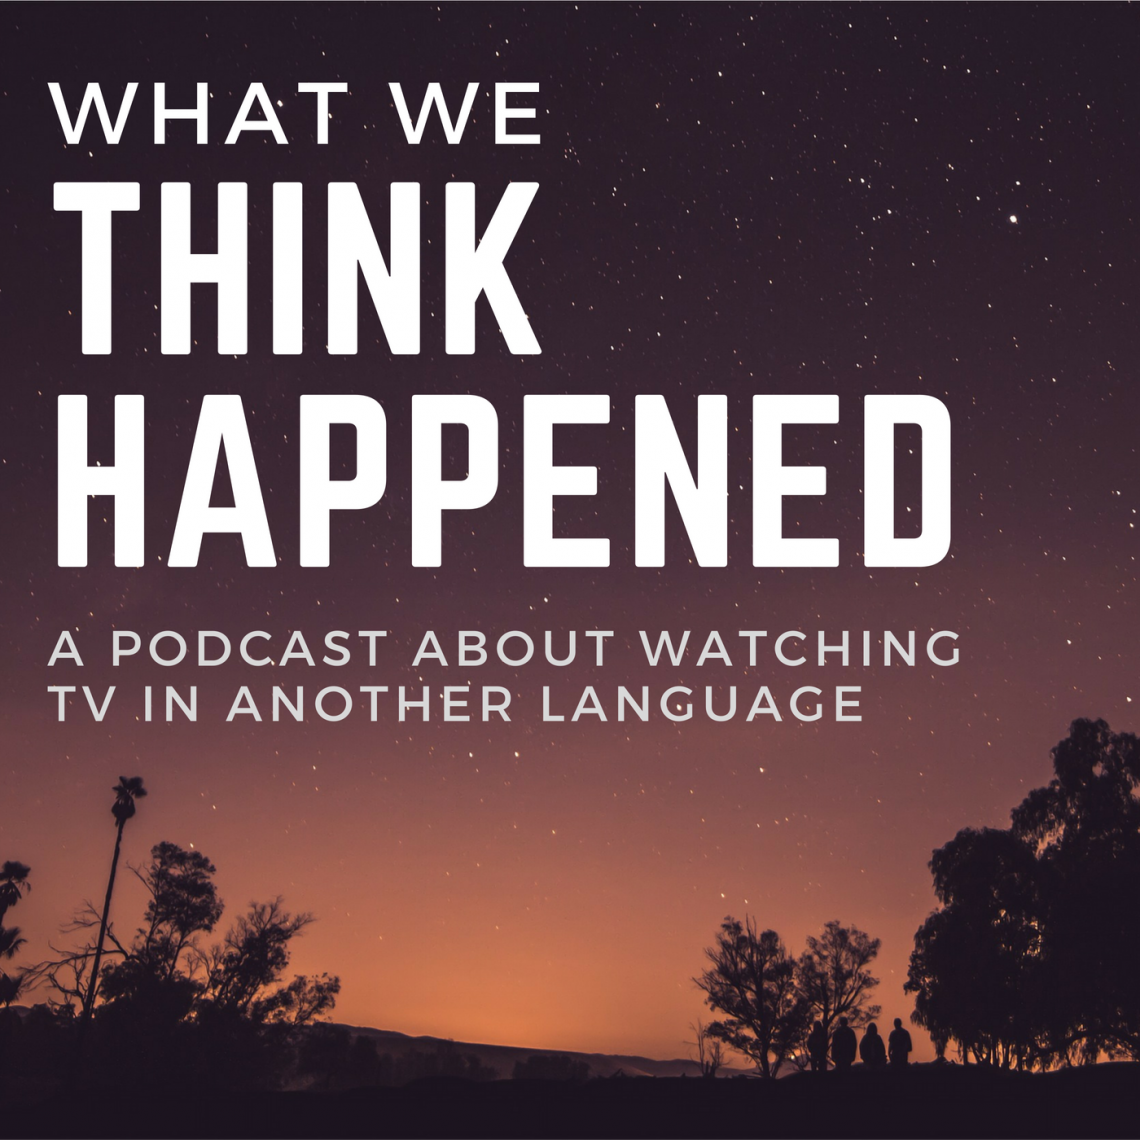 a podcast about watching tv in another language